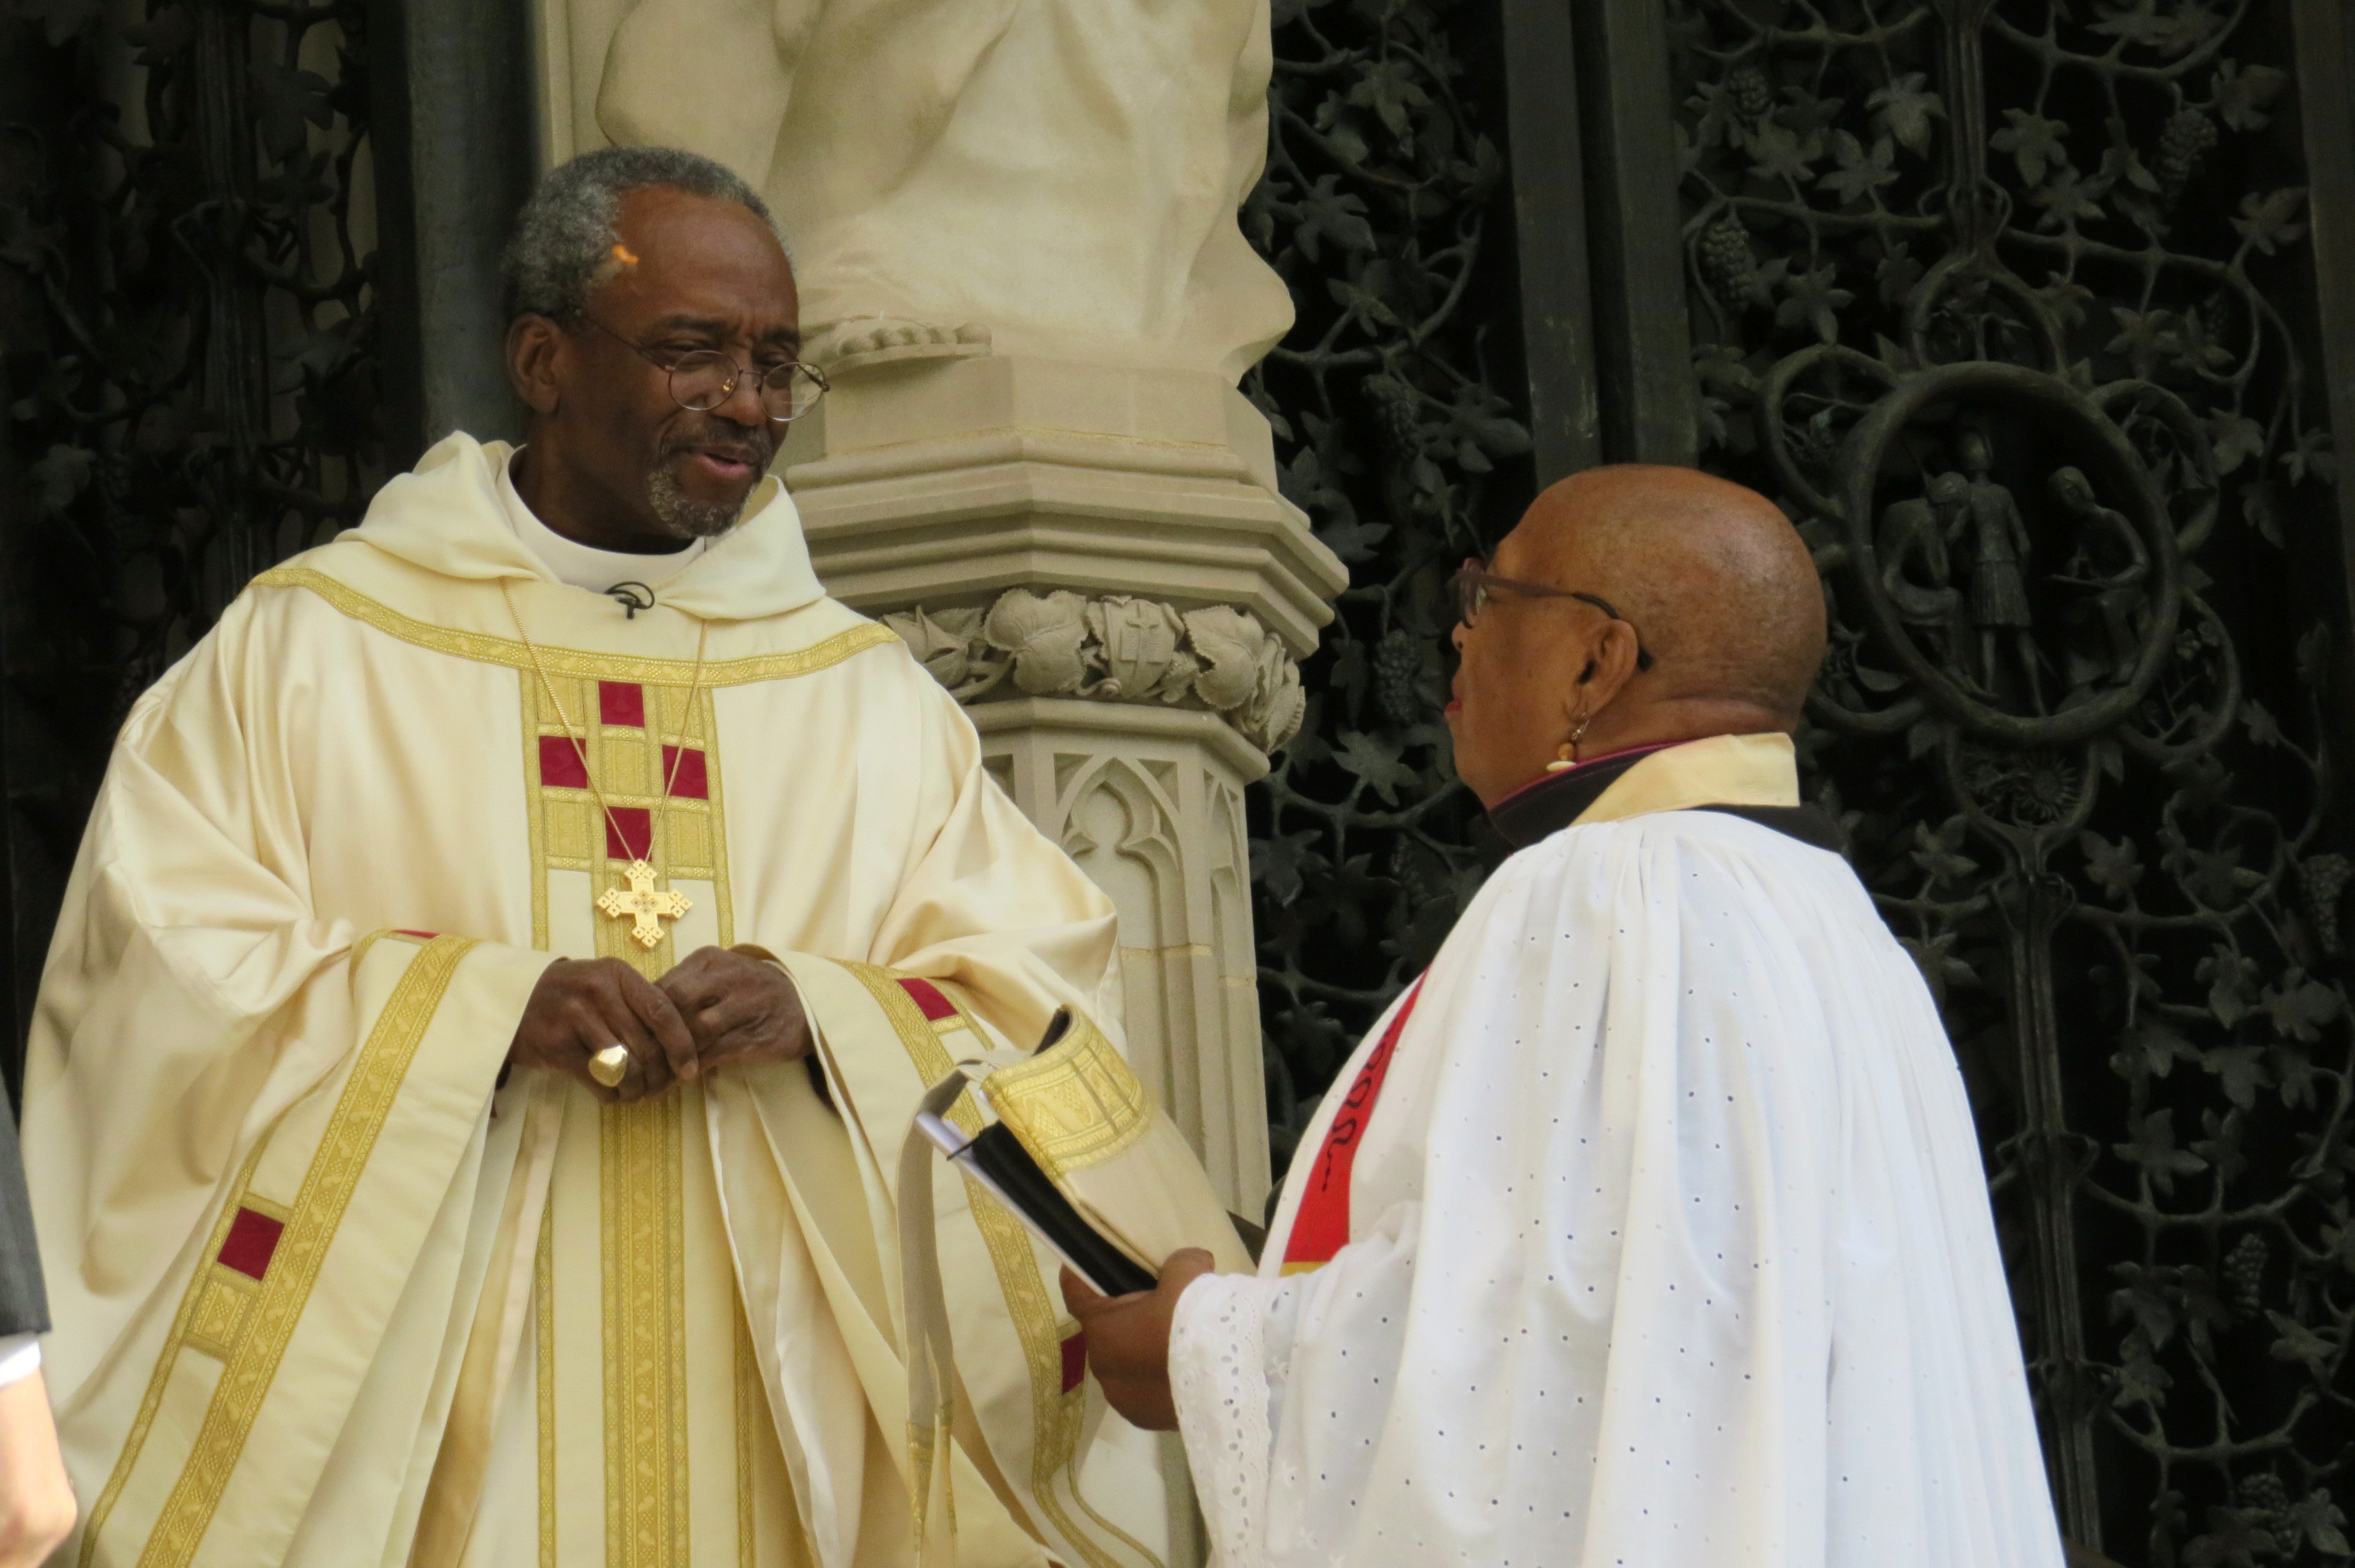 The Rev. Canon Dr. Sandye Wilson with Presidig Bishop Michael Curry